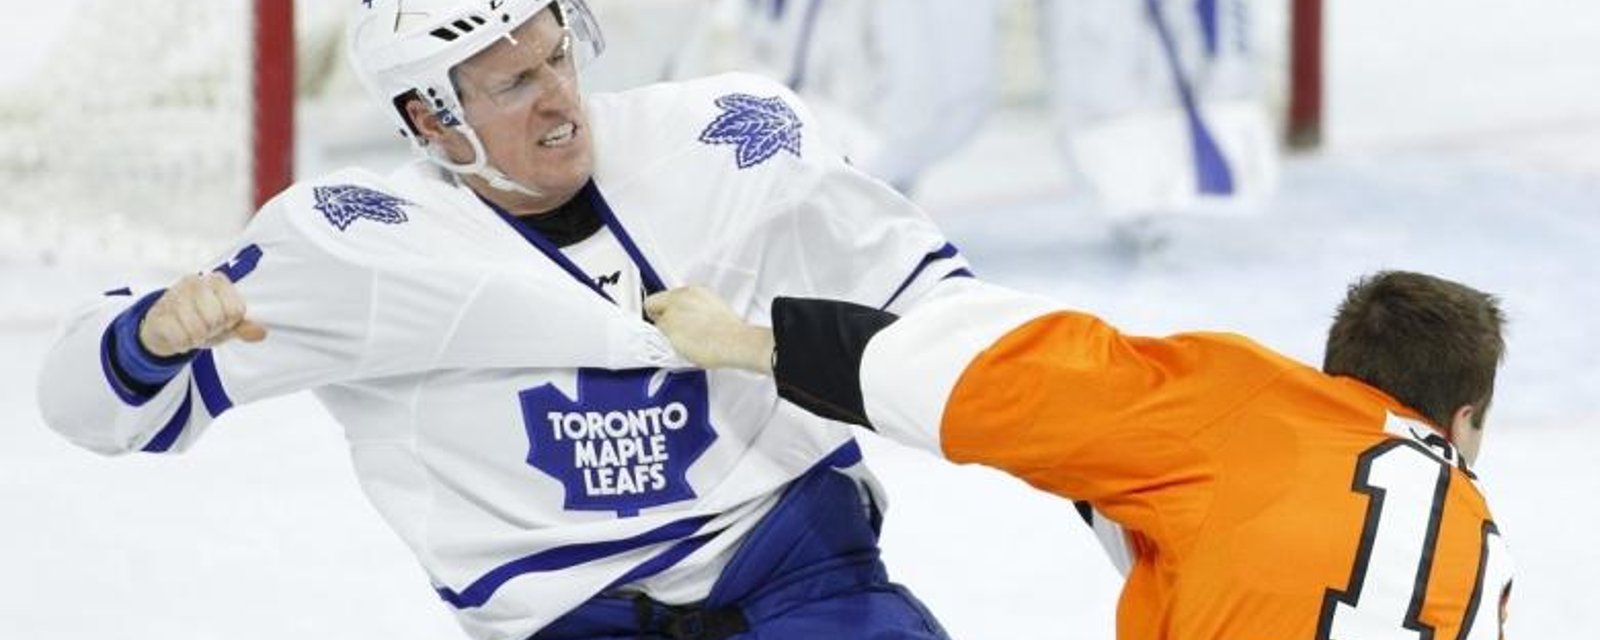 Dion Phaneuf drops the gloves, destroys his opponent.